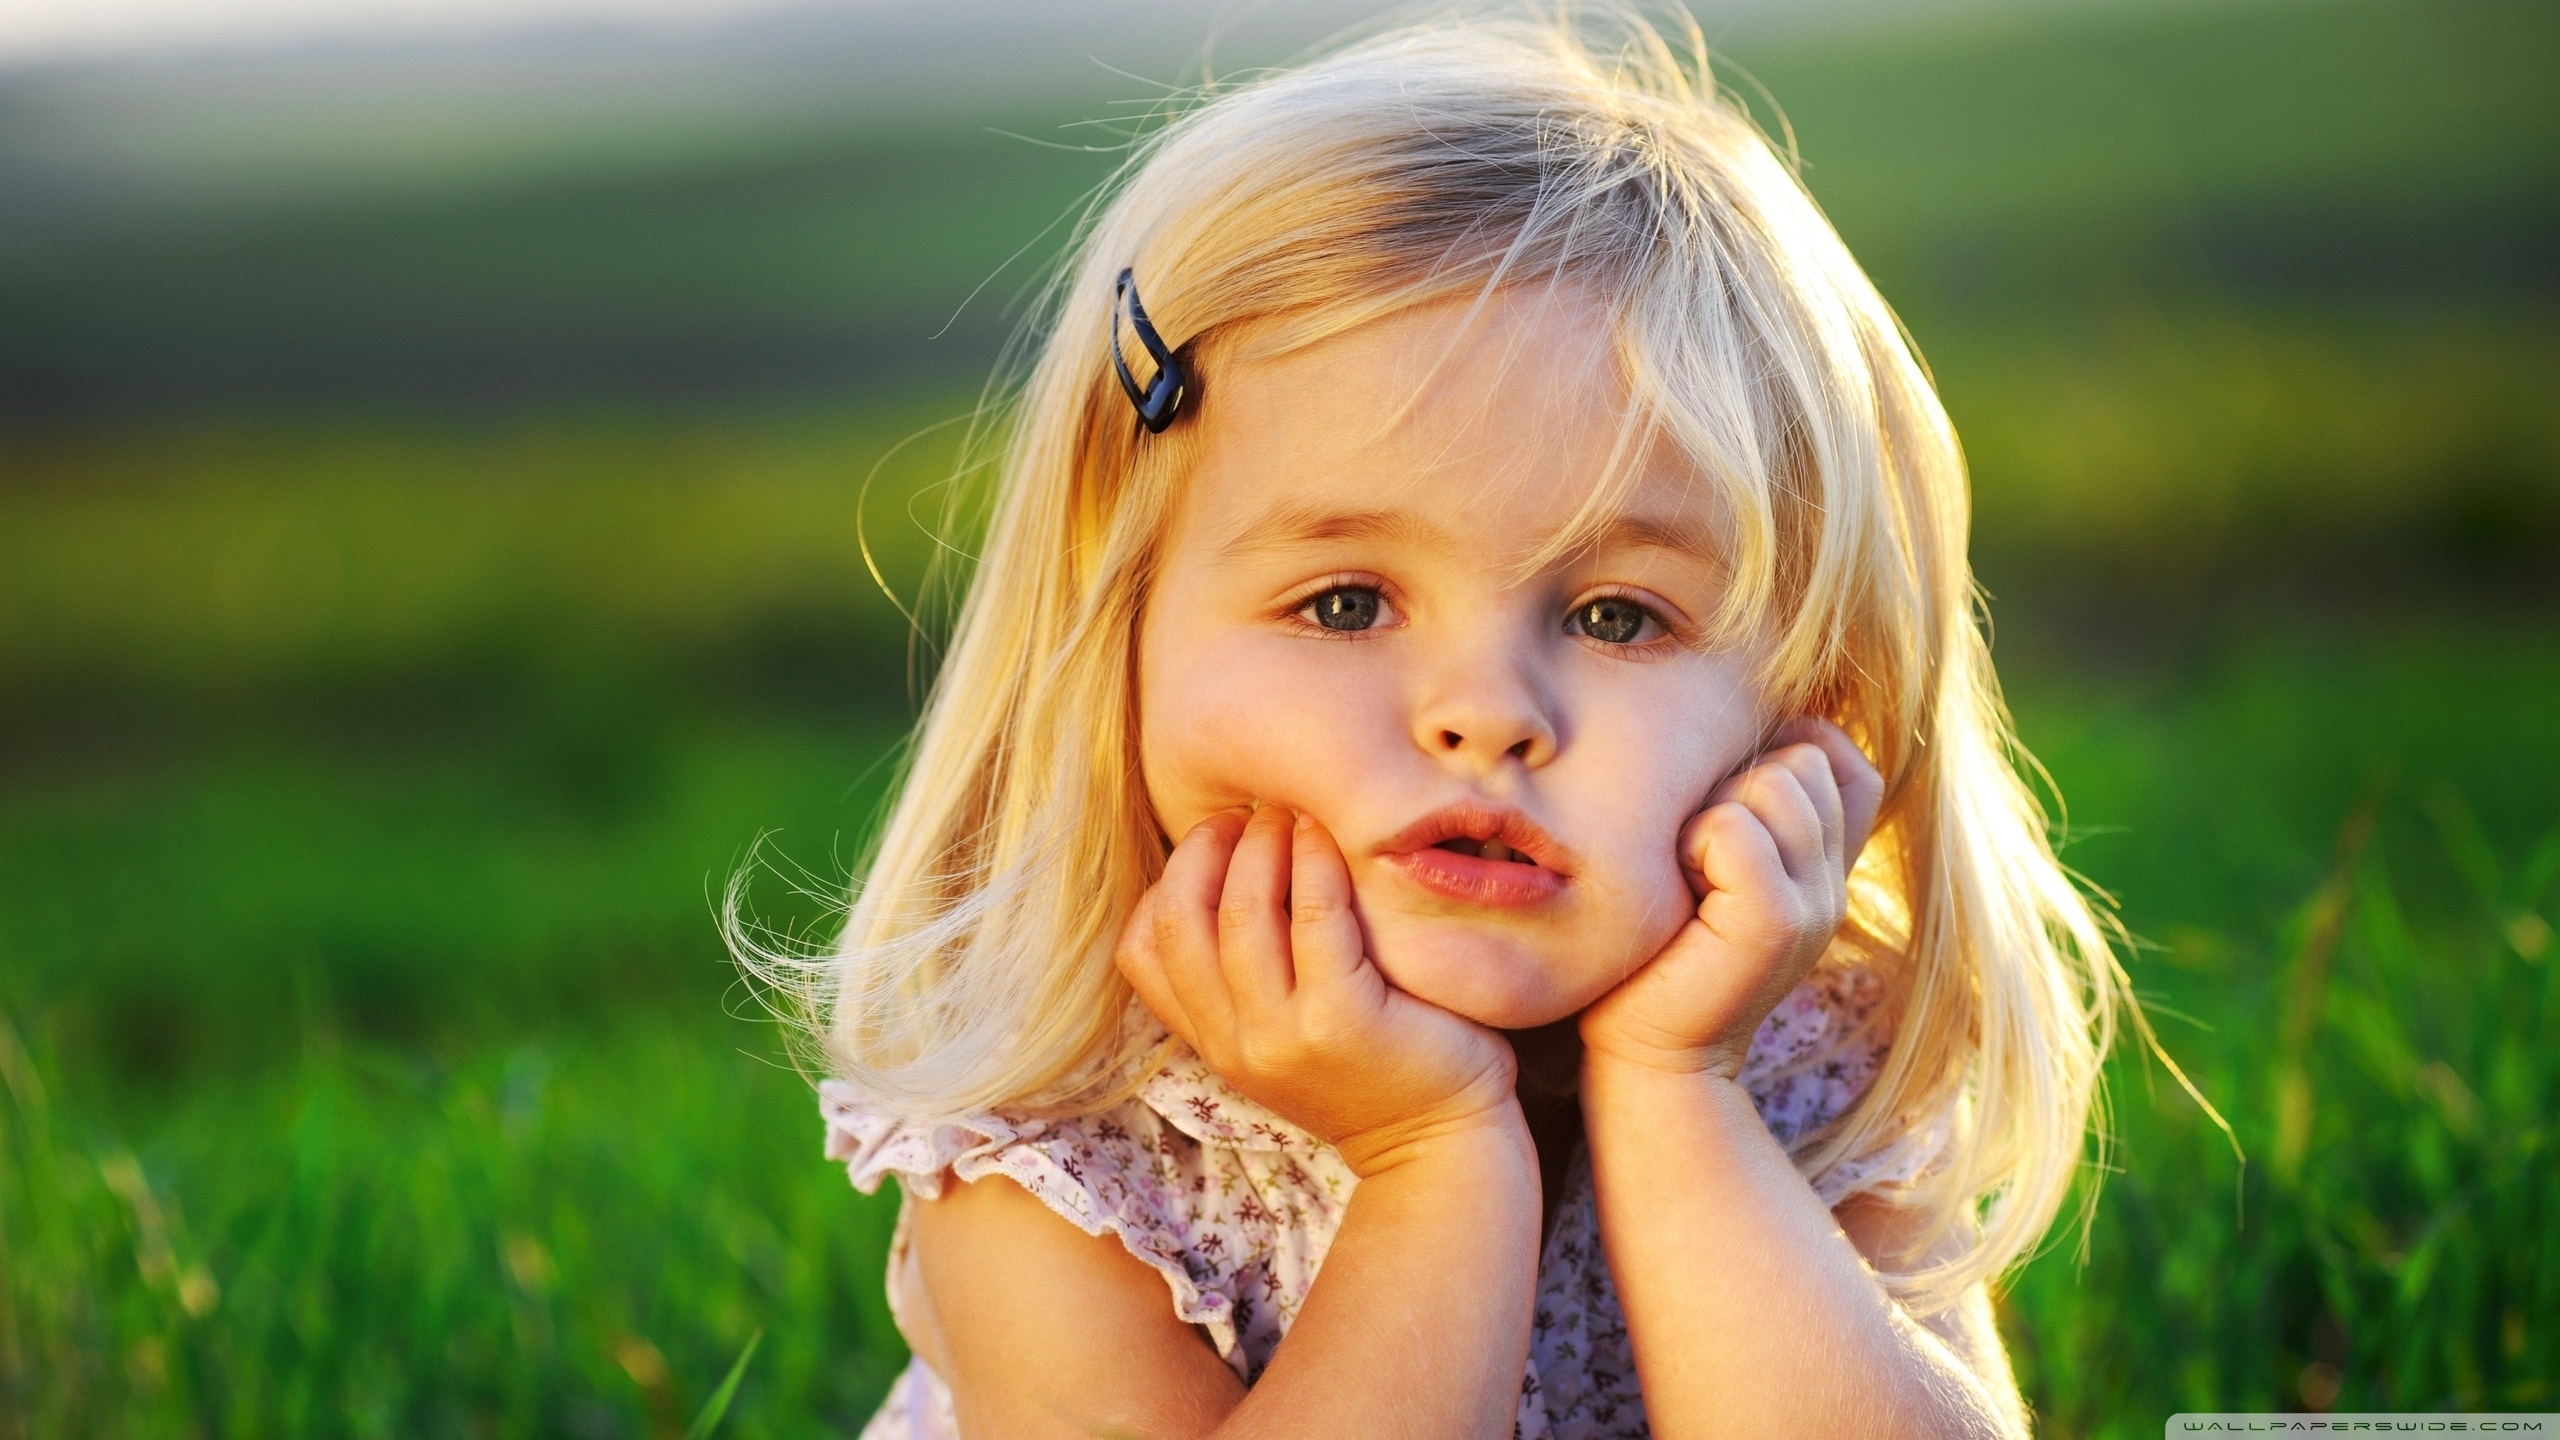 Image for cute babies hd wallpapers 1366x768